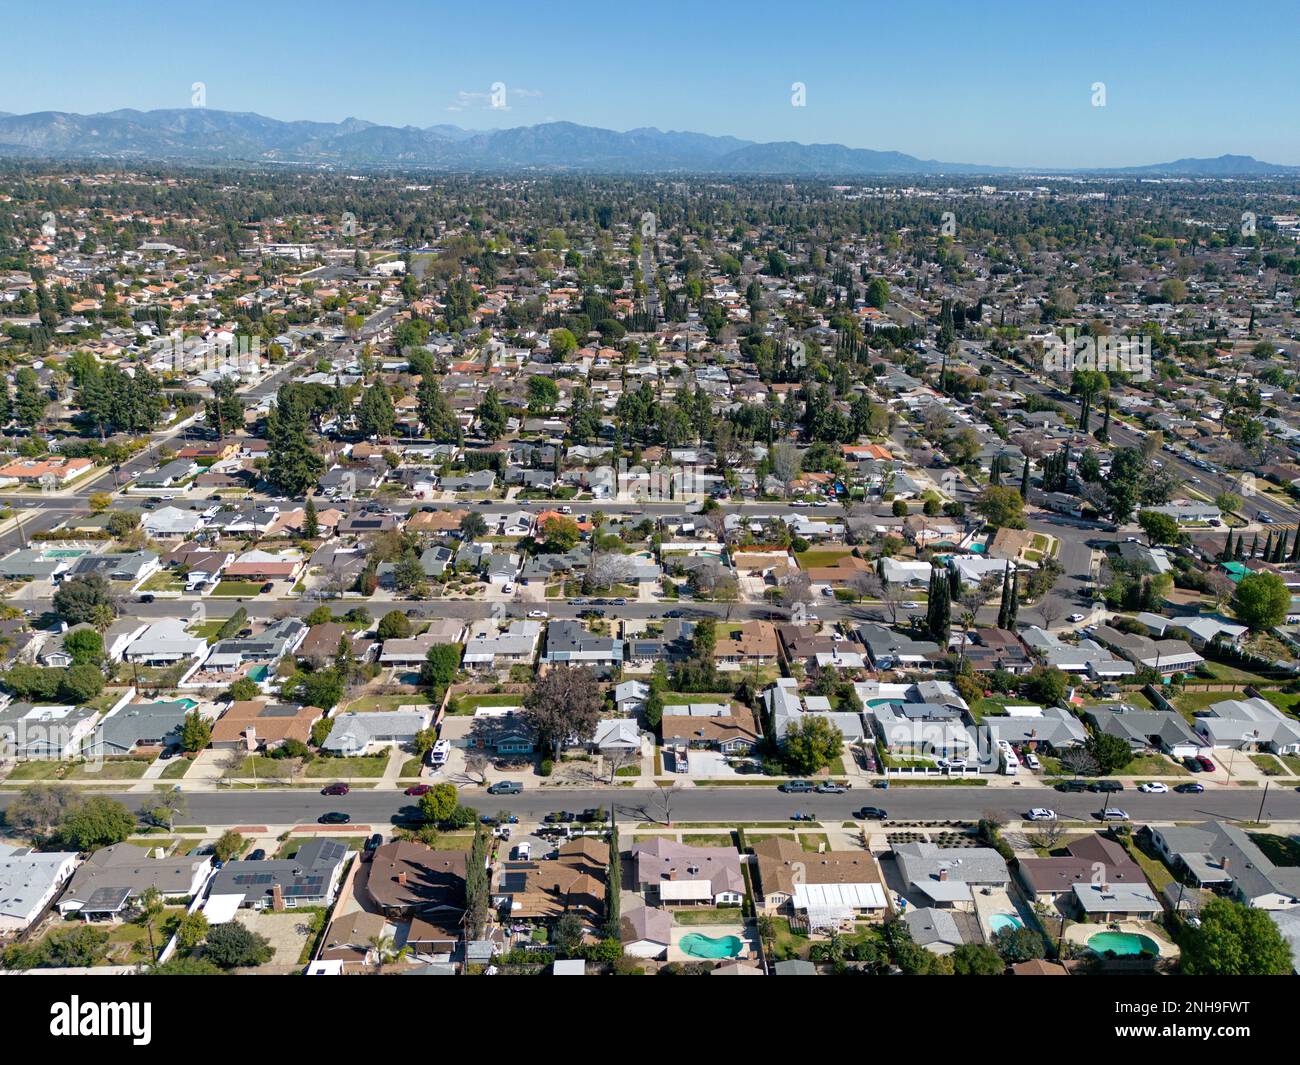 The San Fernando Valley, located in northern section of greater Los Angeles, California is shown from an aerial view during an afternoon day. Stock Photo